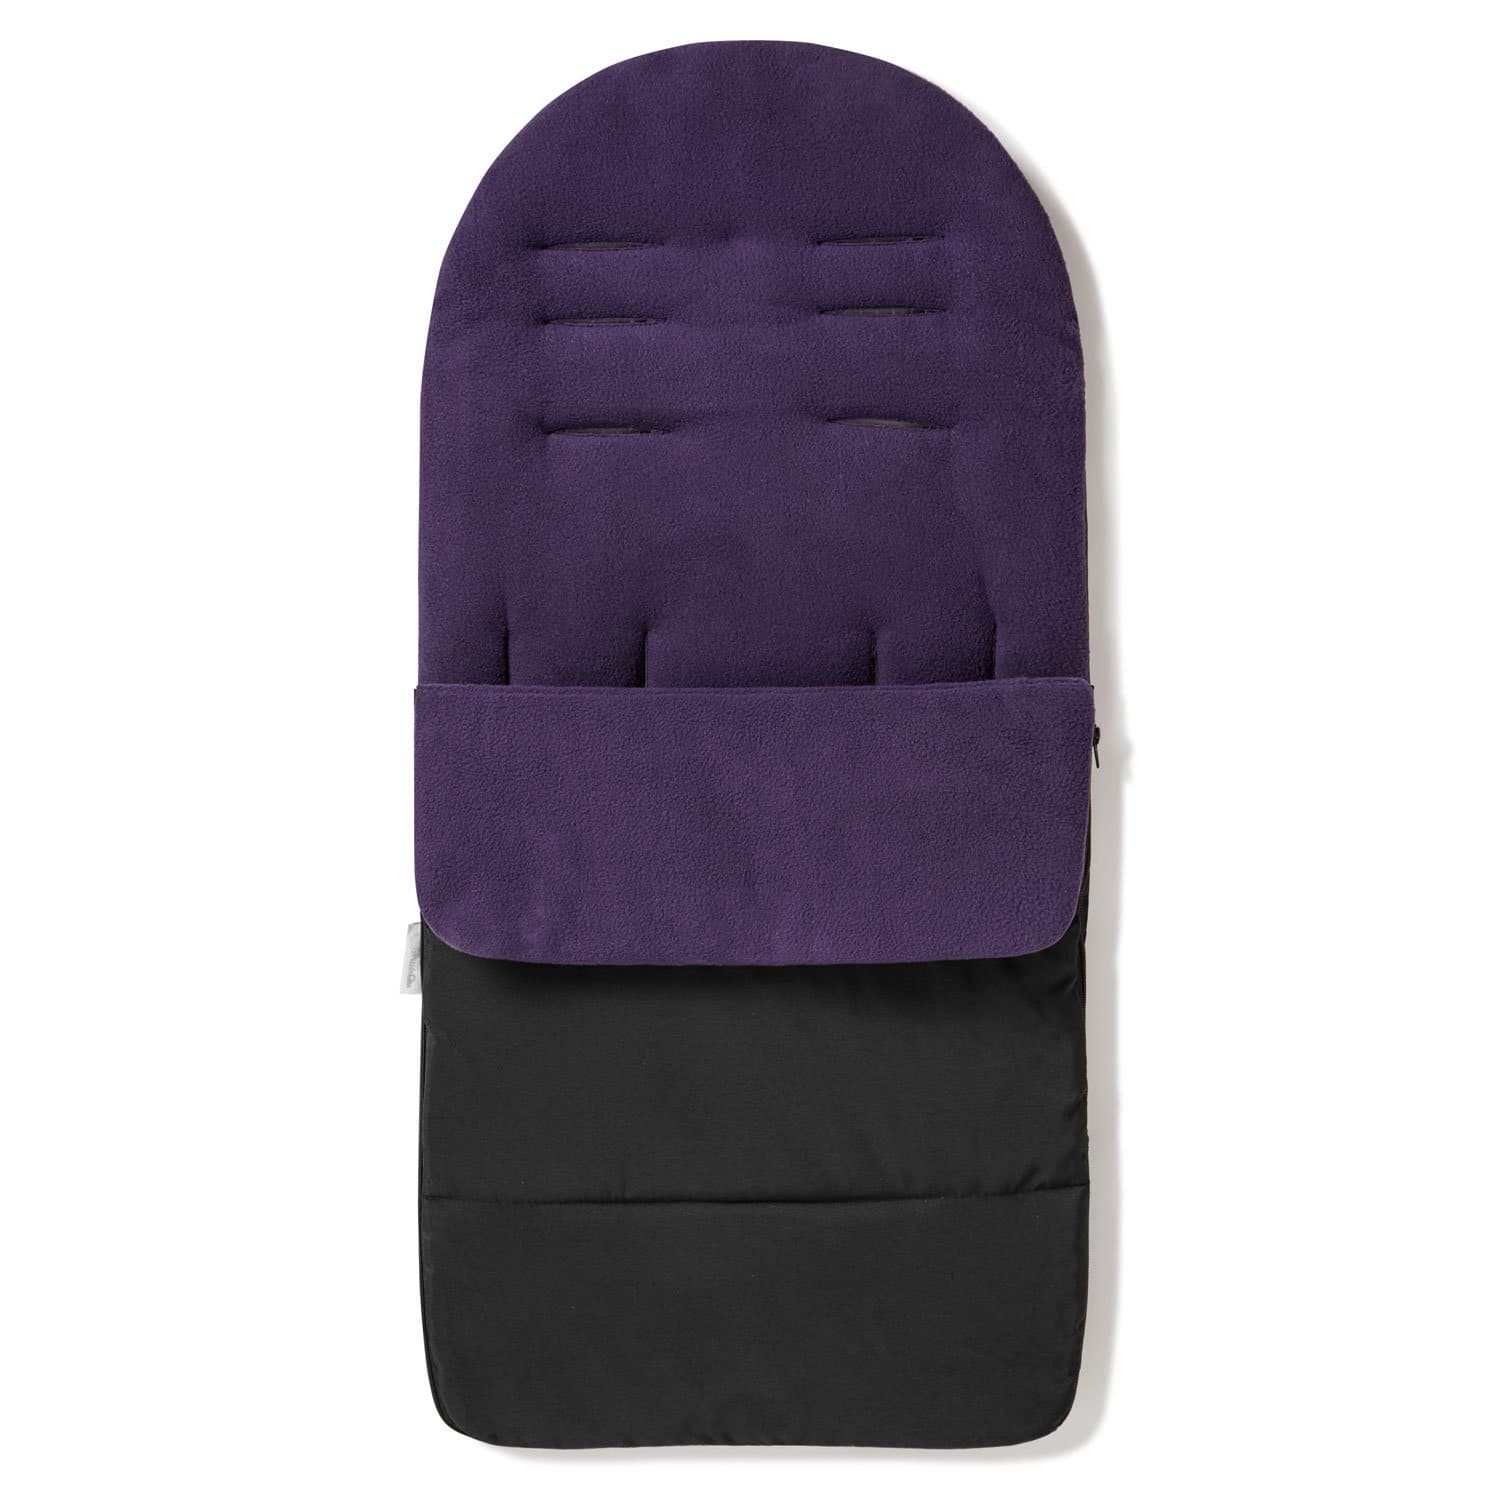 Premium Footmuff / Cosy Toes Compatible with Greentom - Plum Purple / Fits All Models | For Your Little One